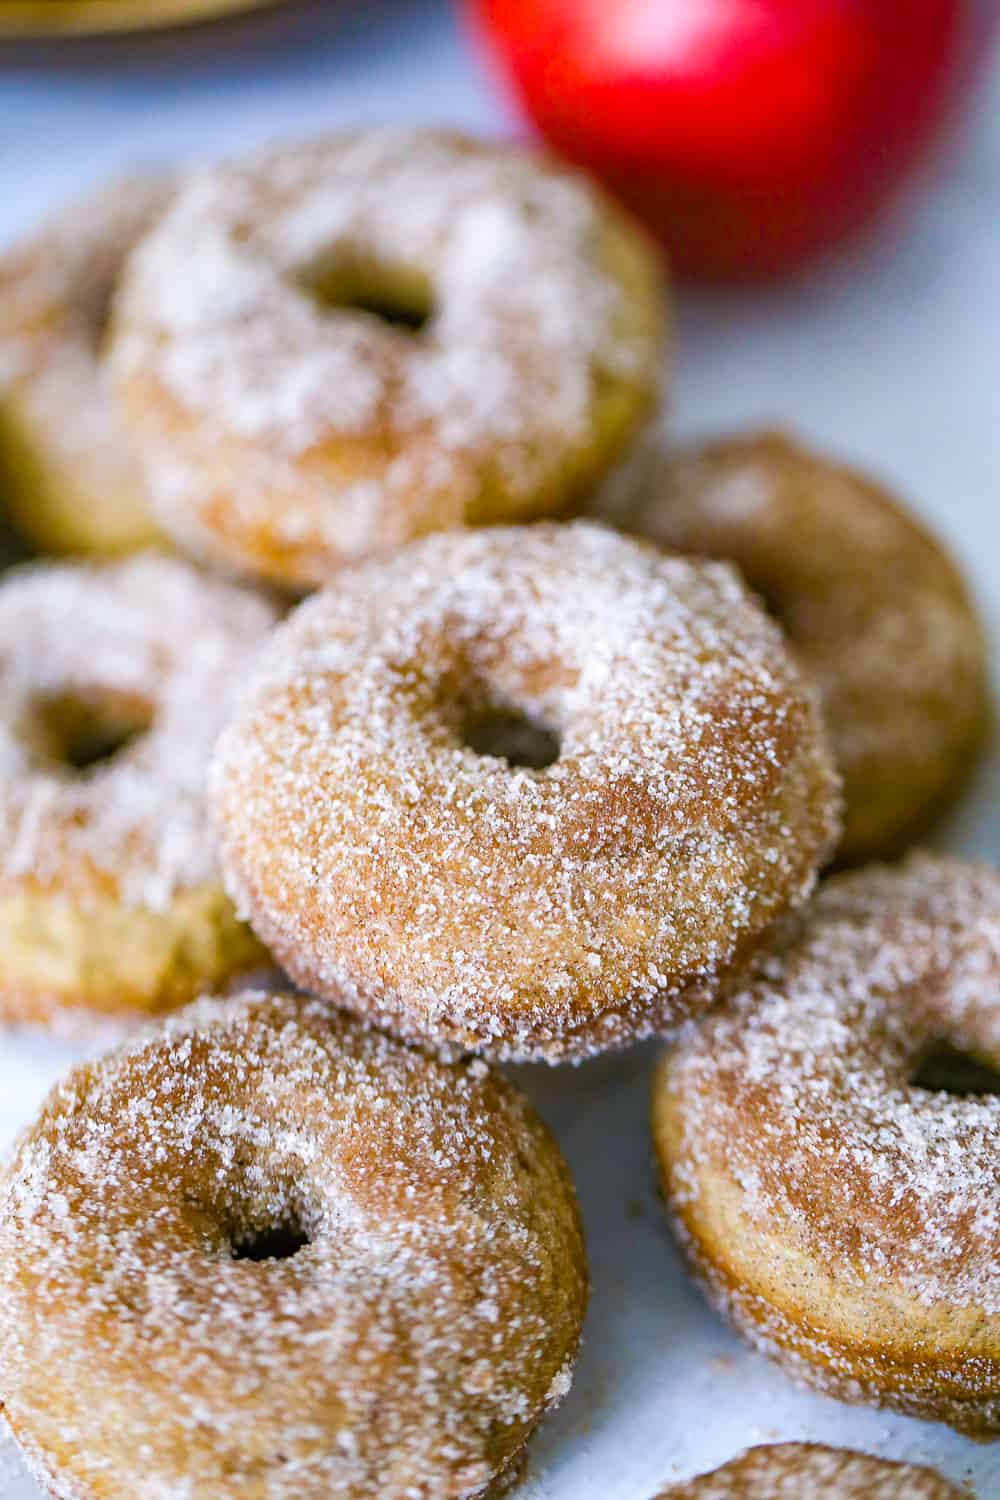 easy baked apple donuts recipe with cinnamon sugar coating